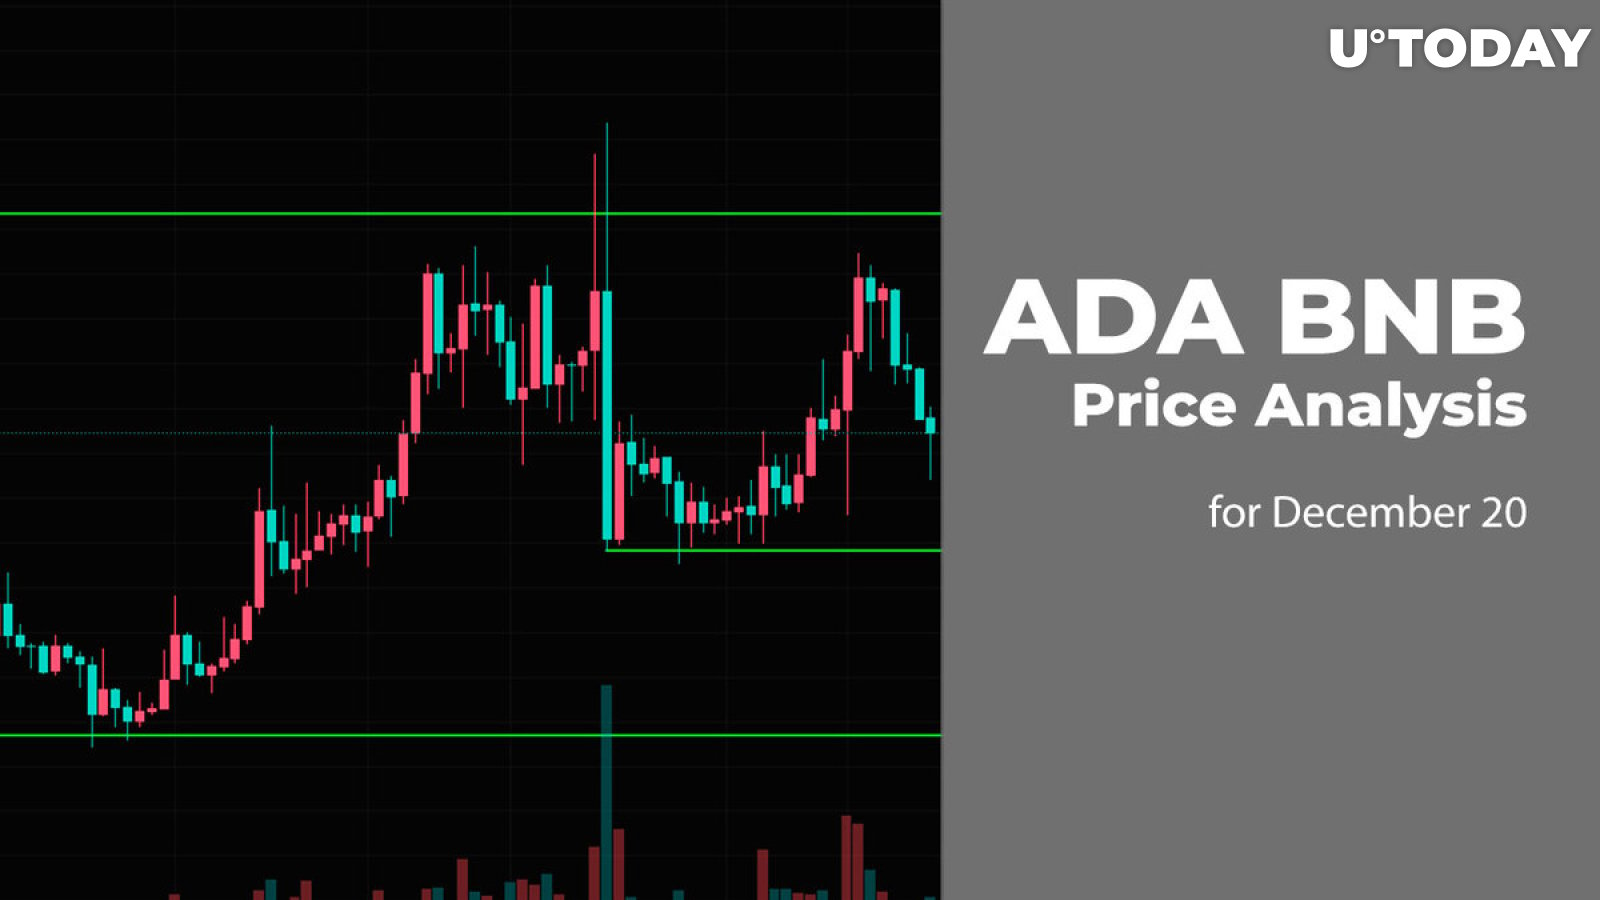 ADA and BNB Price Analysis for December 20